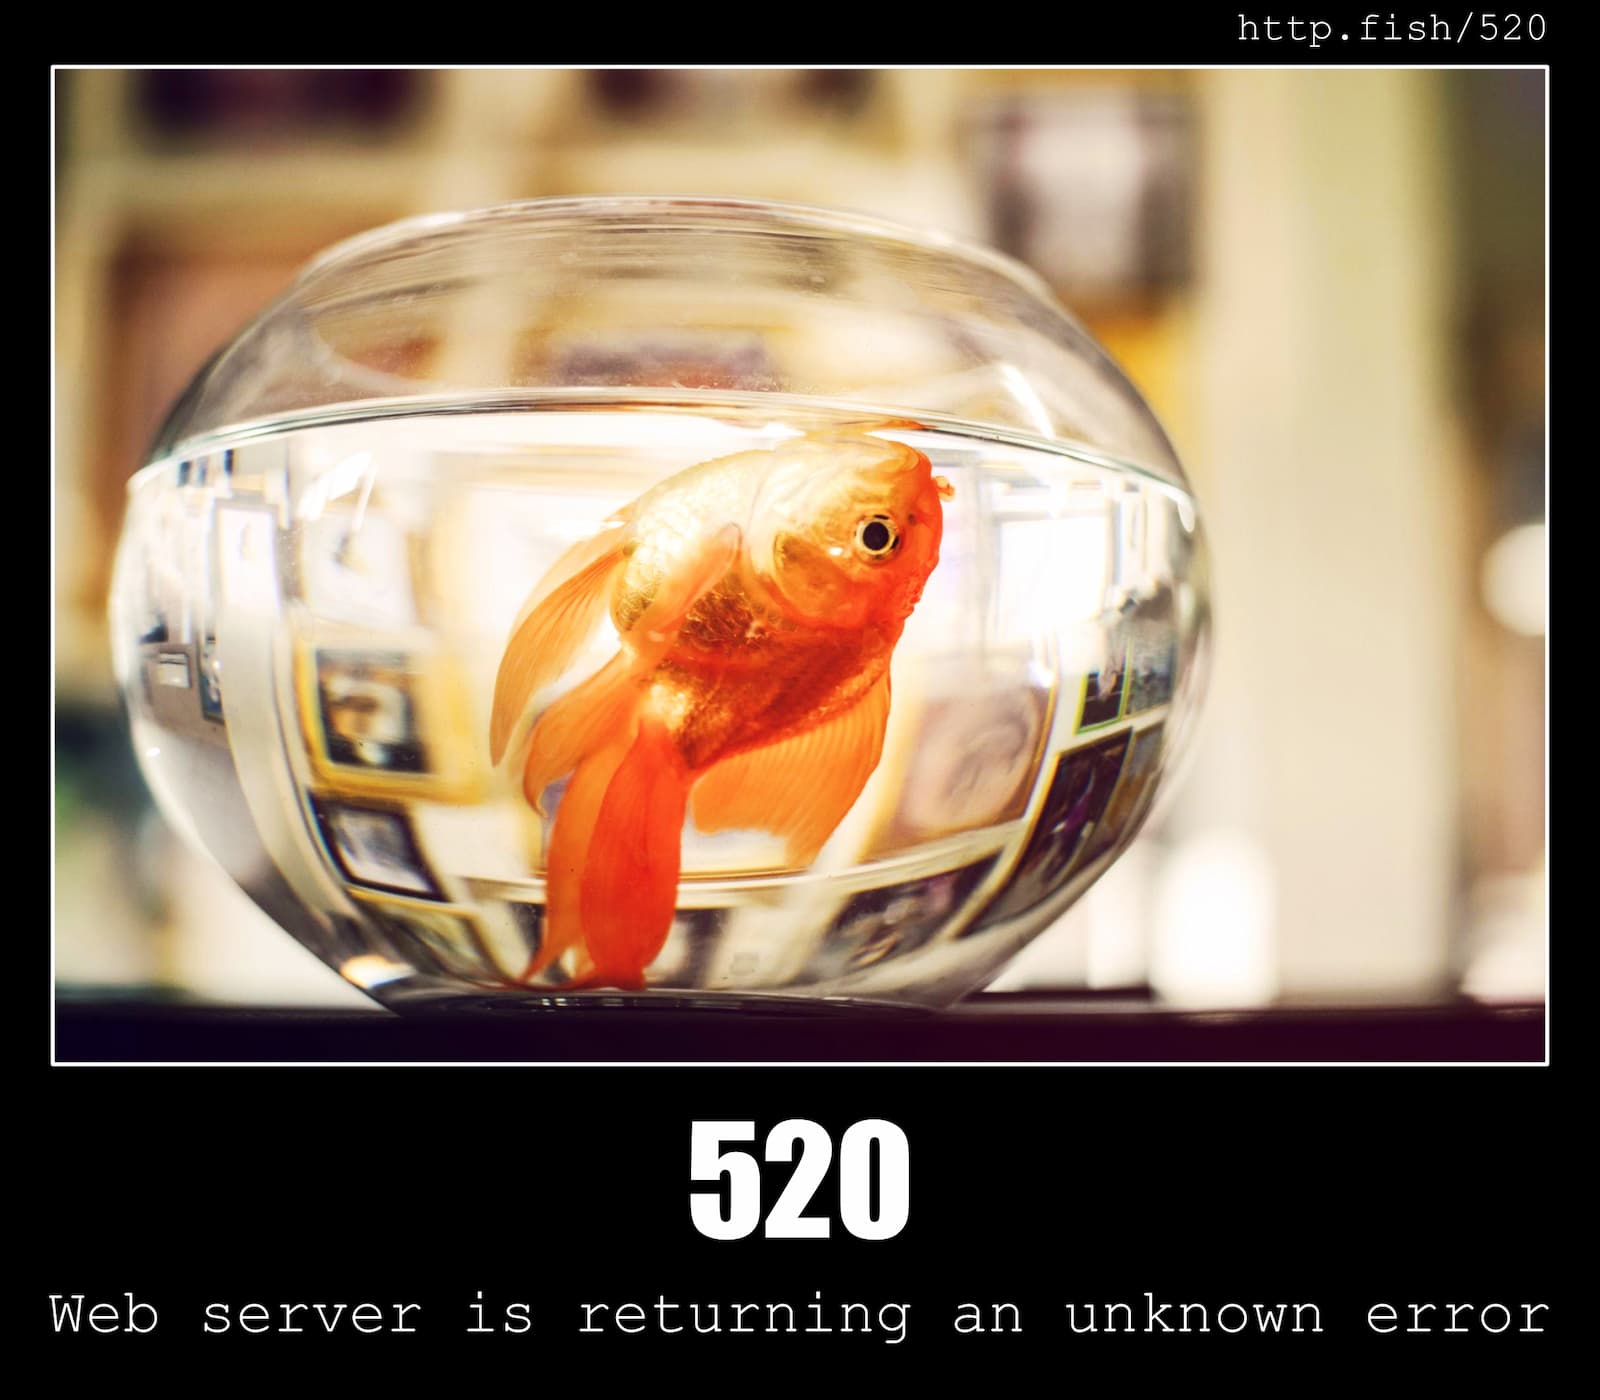 HTTP Status Code 520 Web server is returning an unknown error & Fish